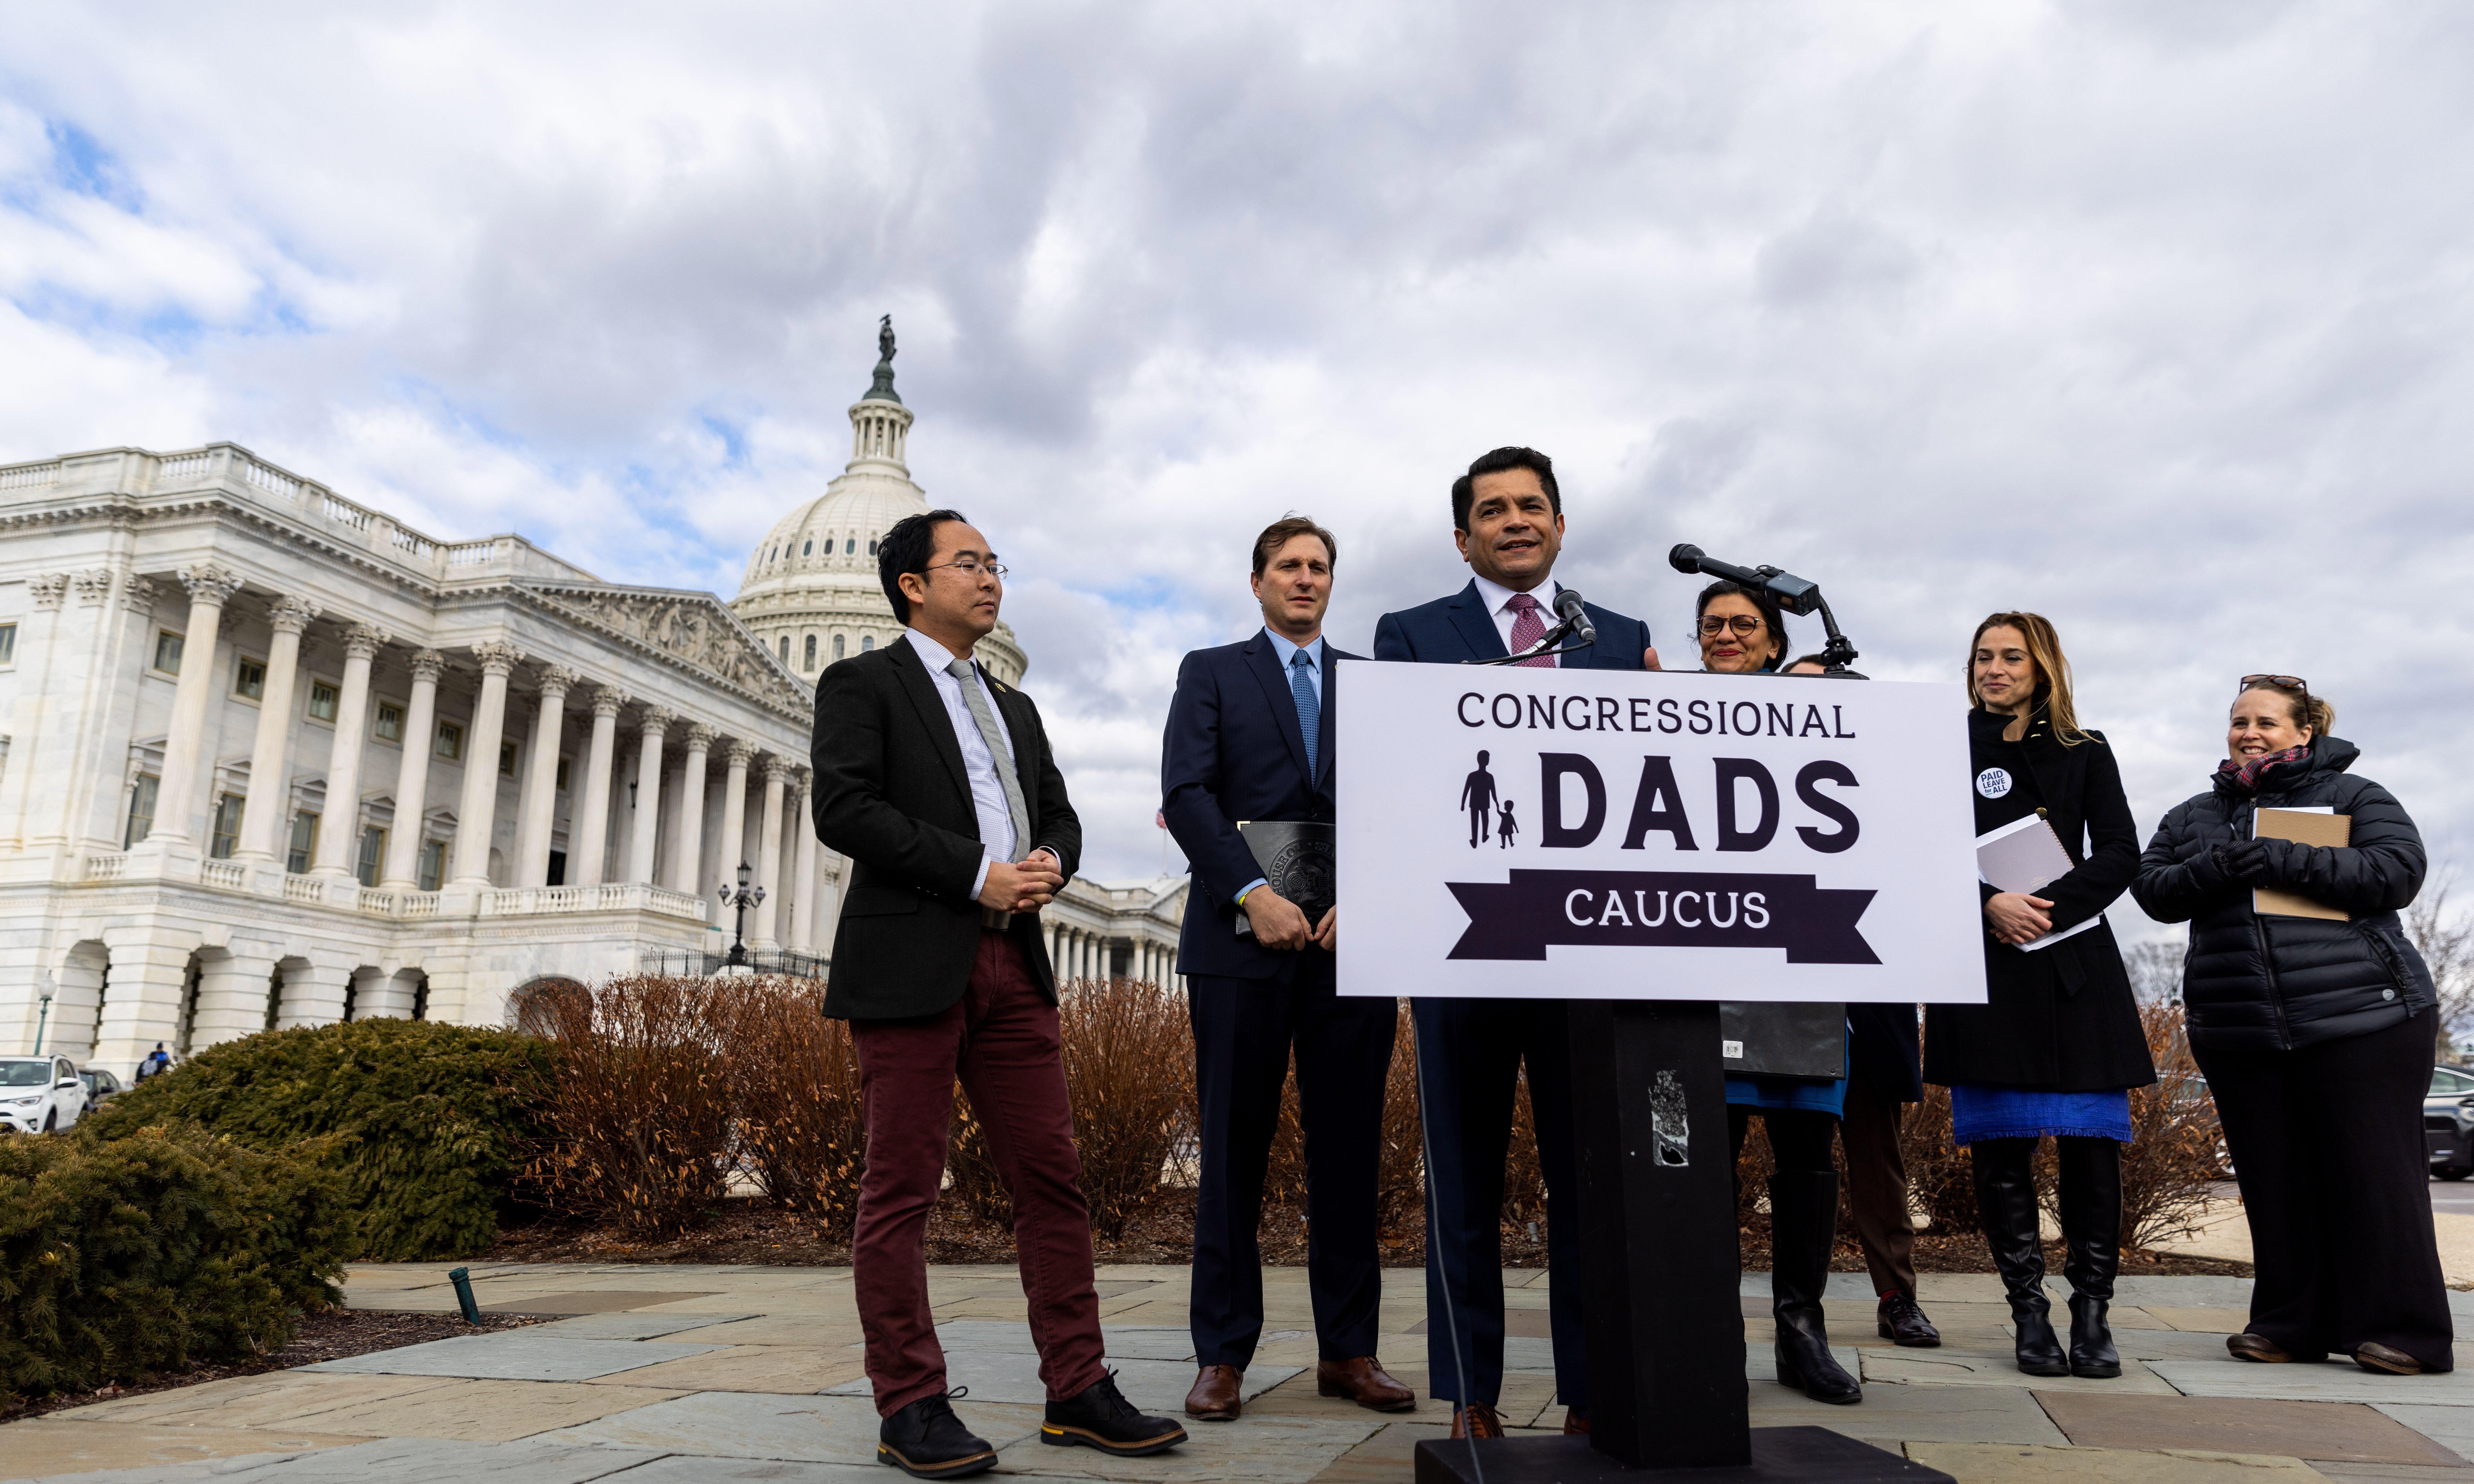 Rep. Jimmy Gomez (D-Calif.) and other lawmakers announce the Congressional Dads Caucus.